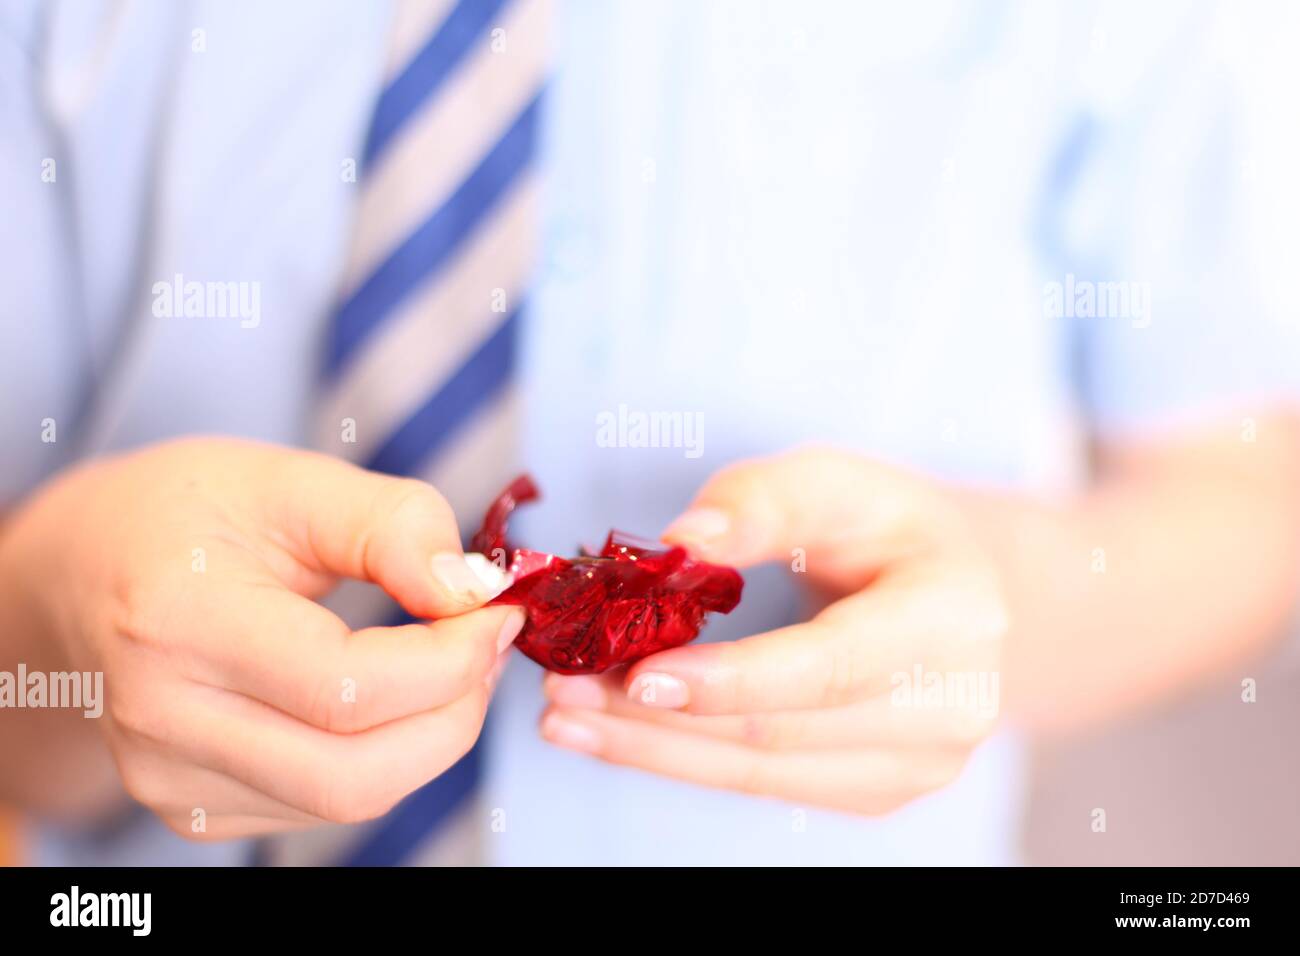 Child unwrapping Quality Street Strawberry Delight chocolate sweet wrapped in wrapper, close up Stock Photo